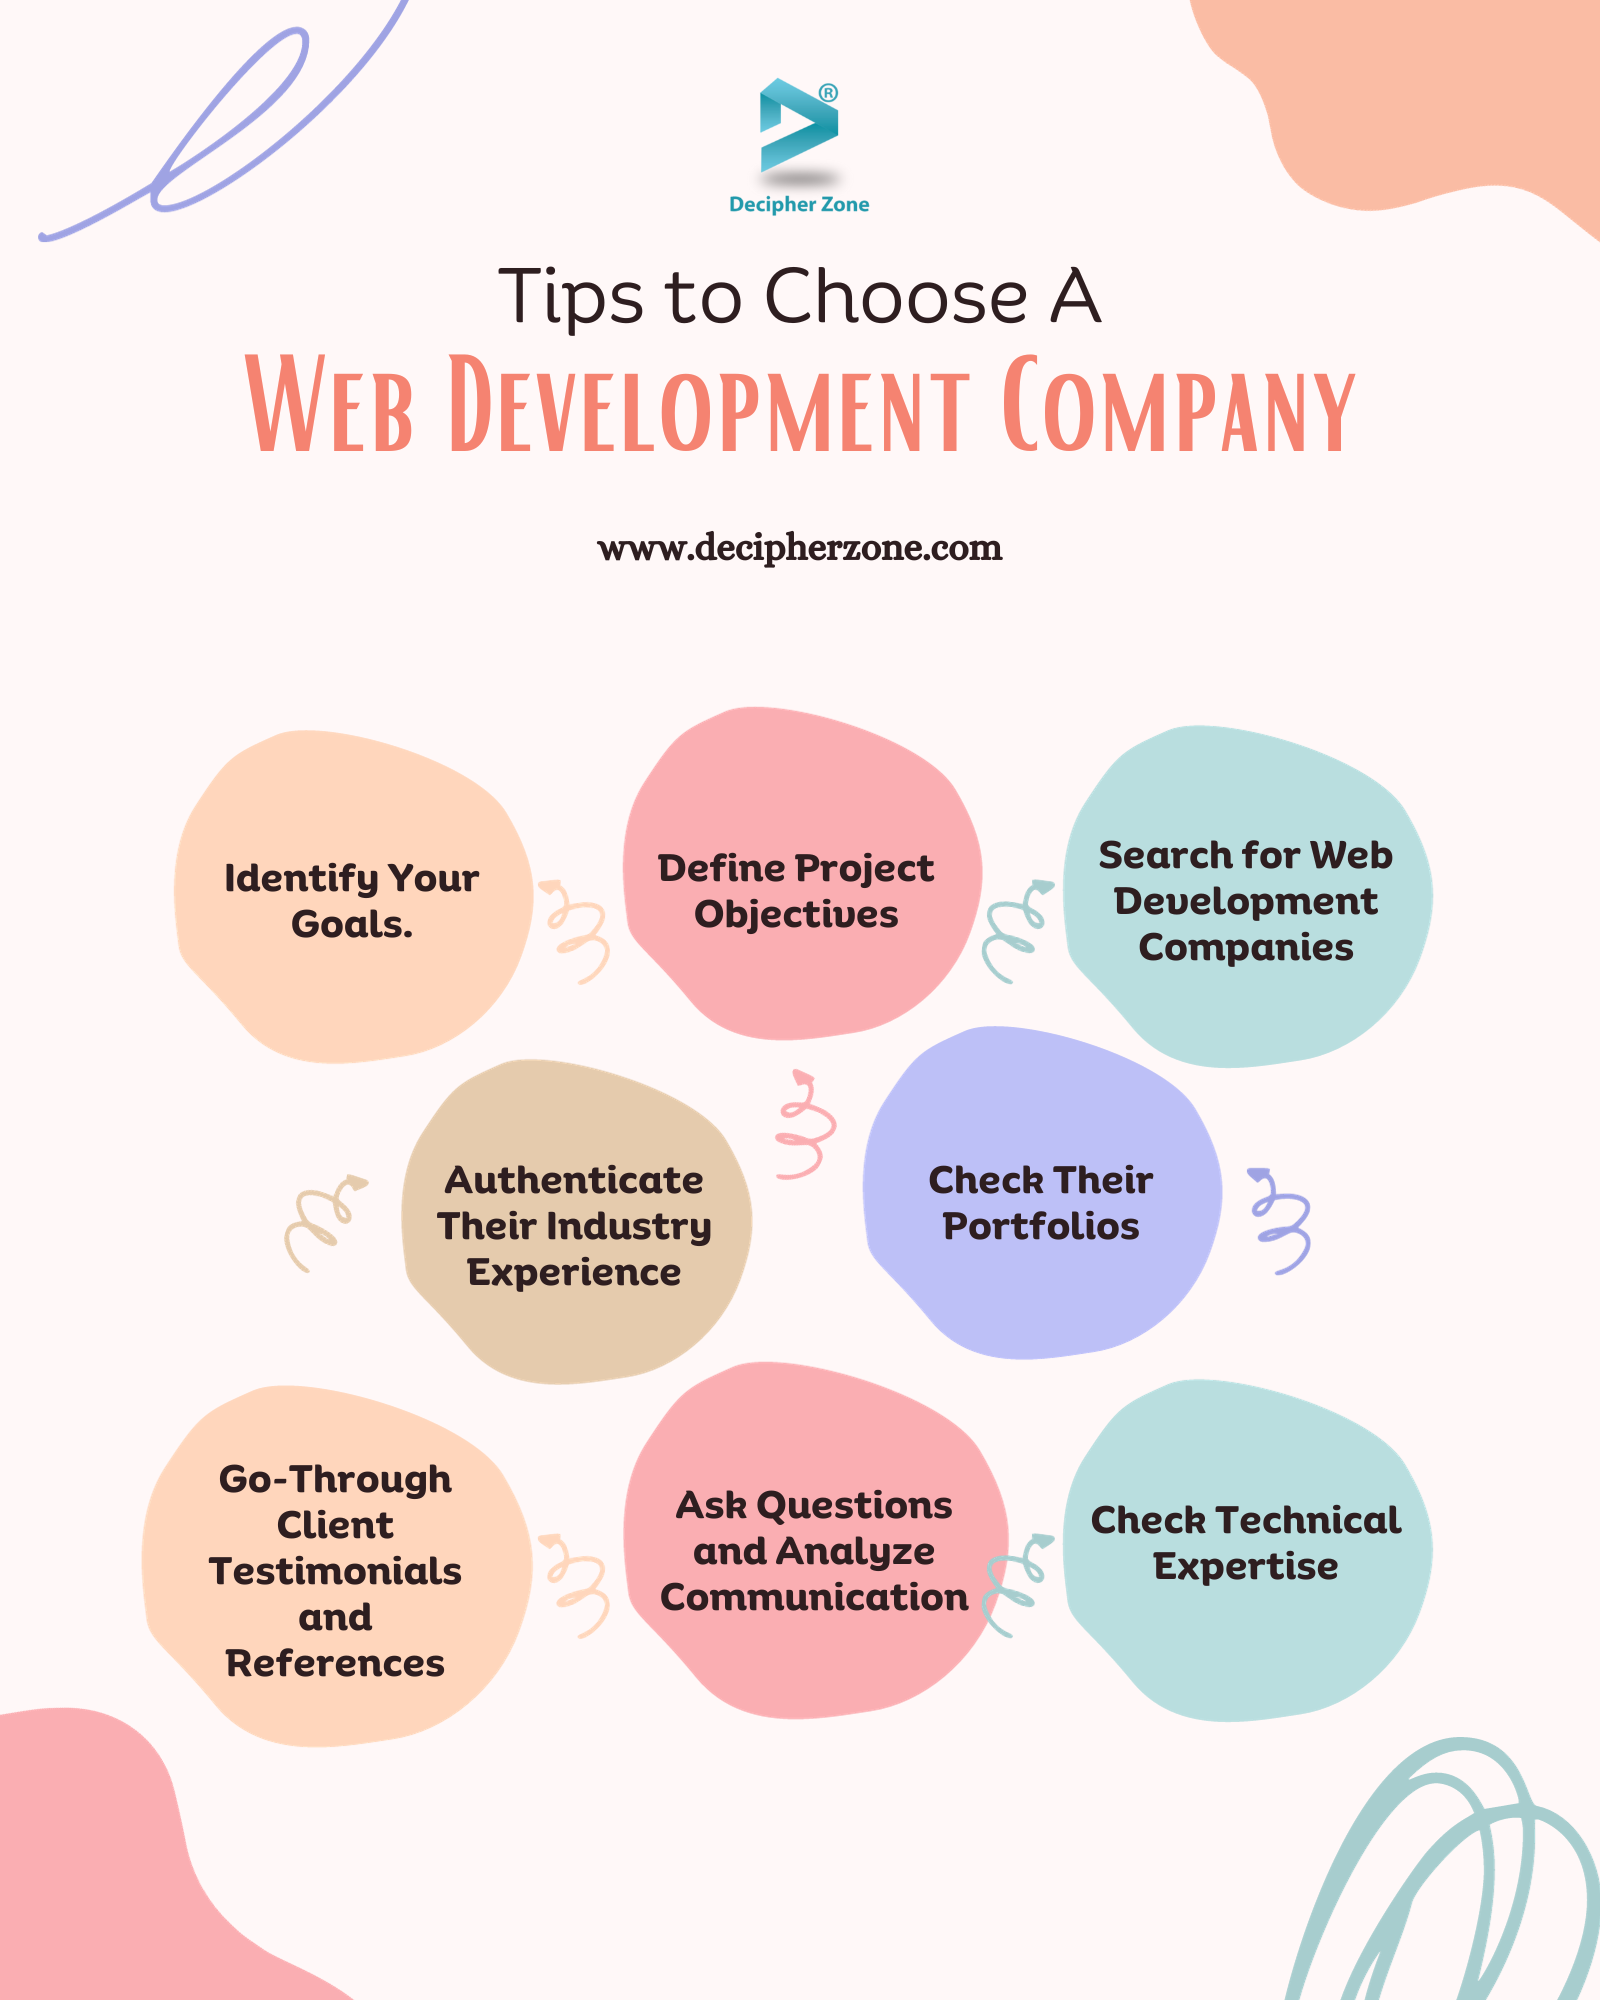 Tips to Choose a Web Development Company for Your Startup